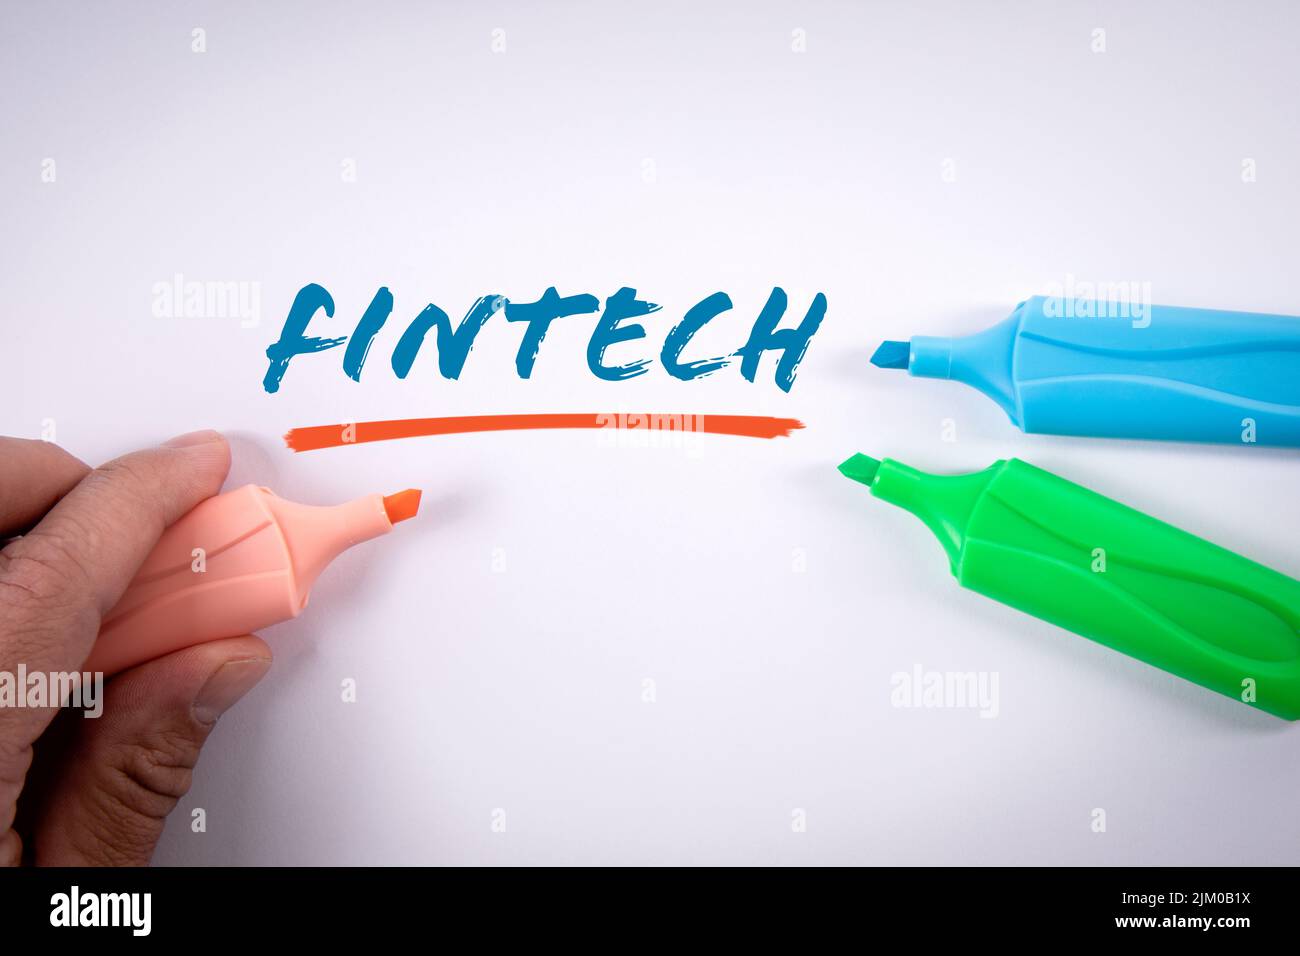 Fintech. Text and colored markers on a white background. Stock Photo